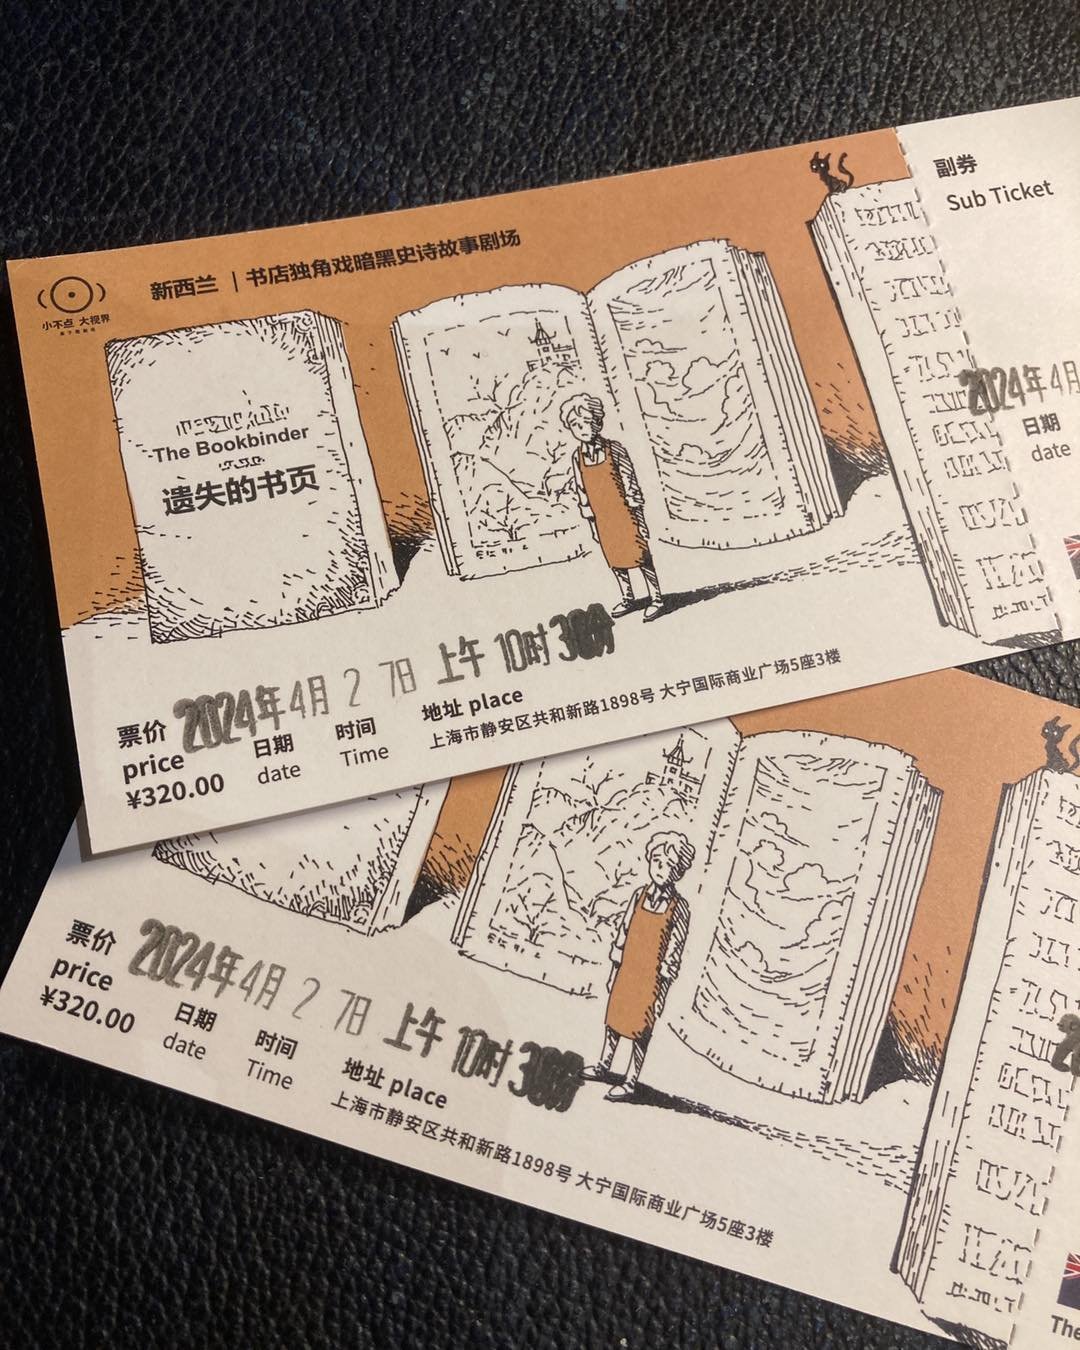 Stunning artwork discoveries continue. Just discovered these are the tickets for #TheBookbinder here. Shanghai got game.